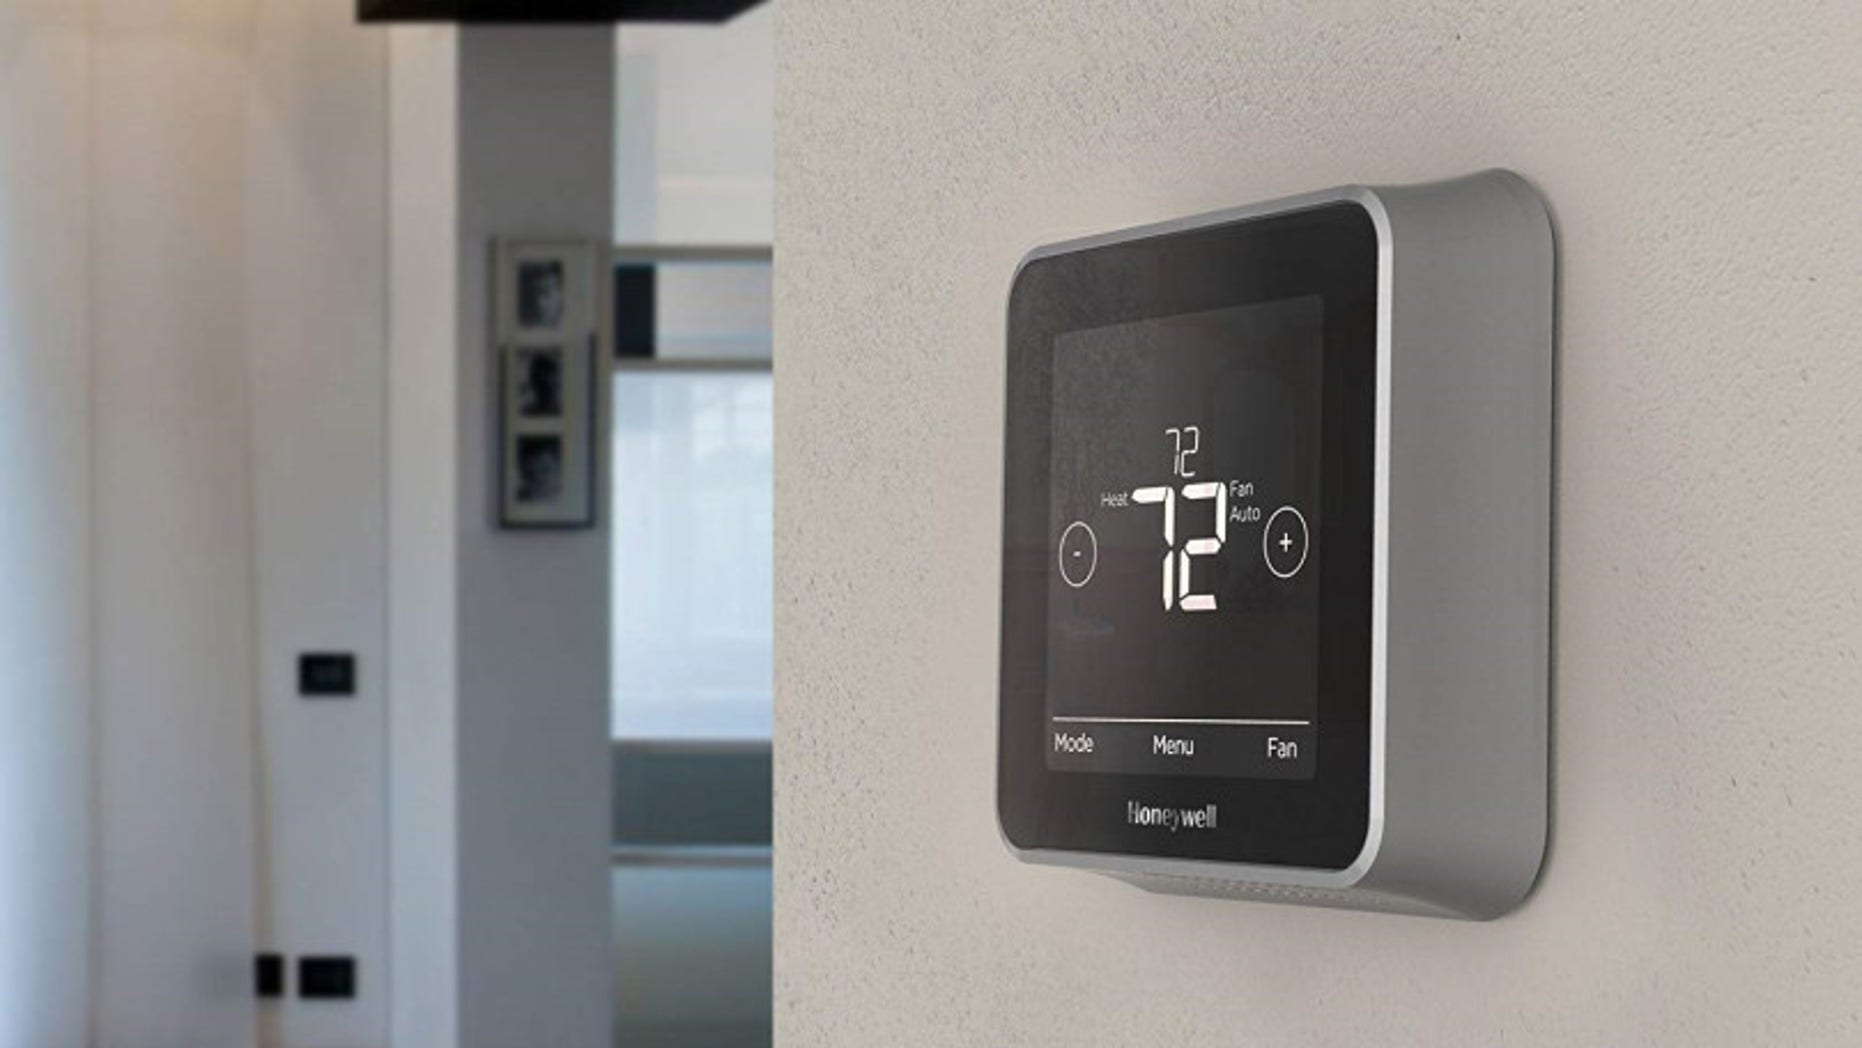 A Honeywell intelligent thermostat is seen above.